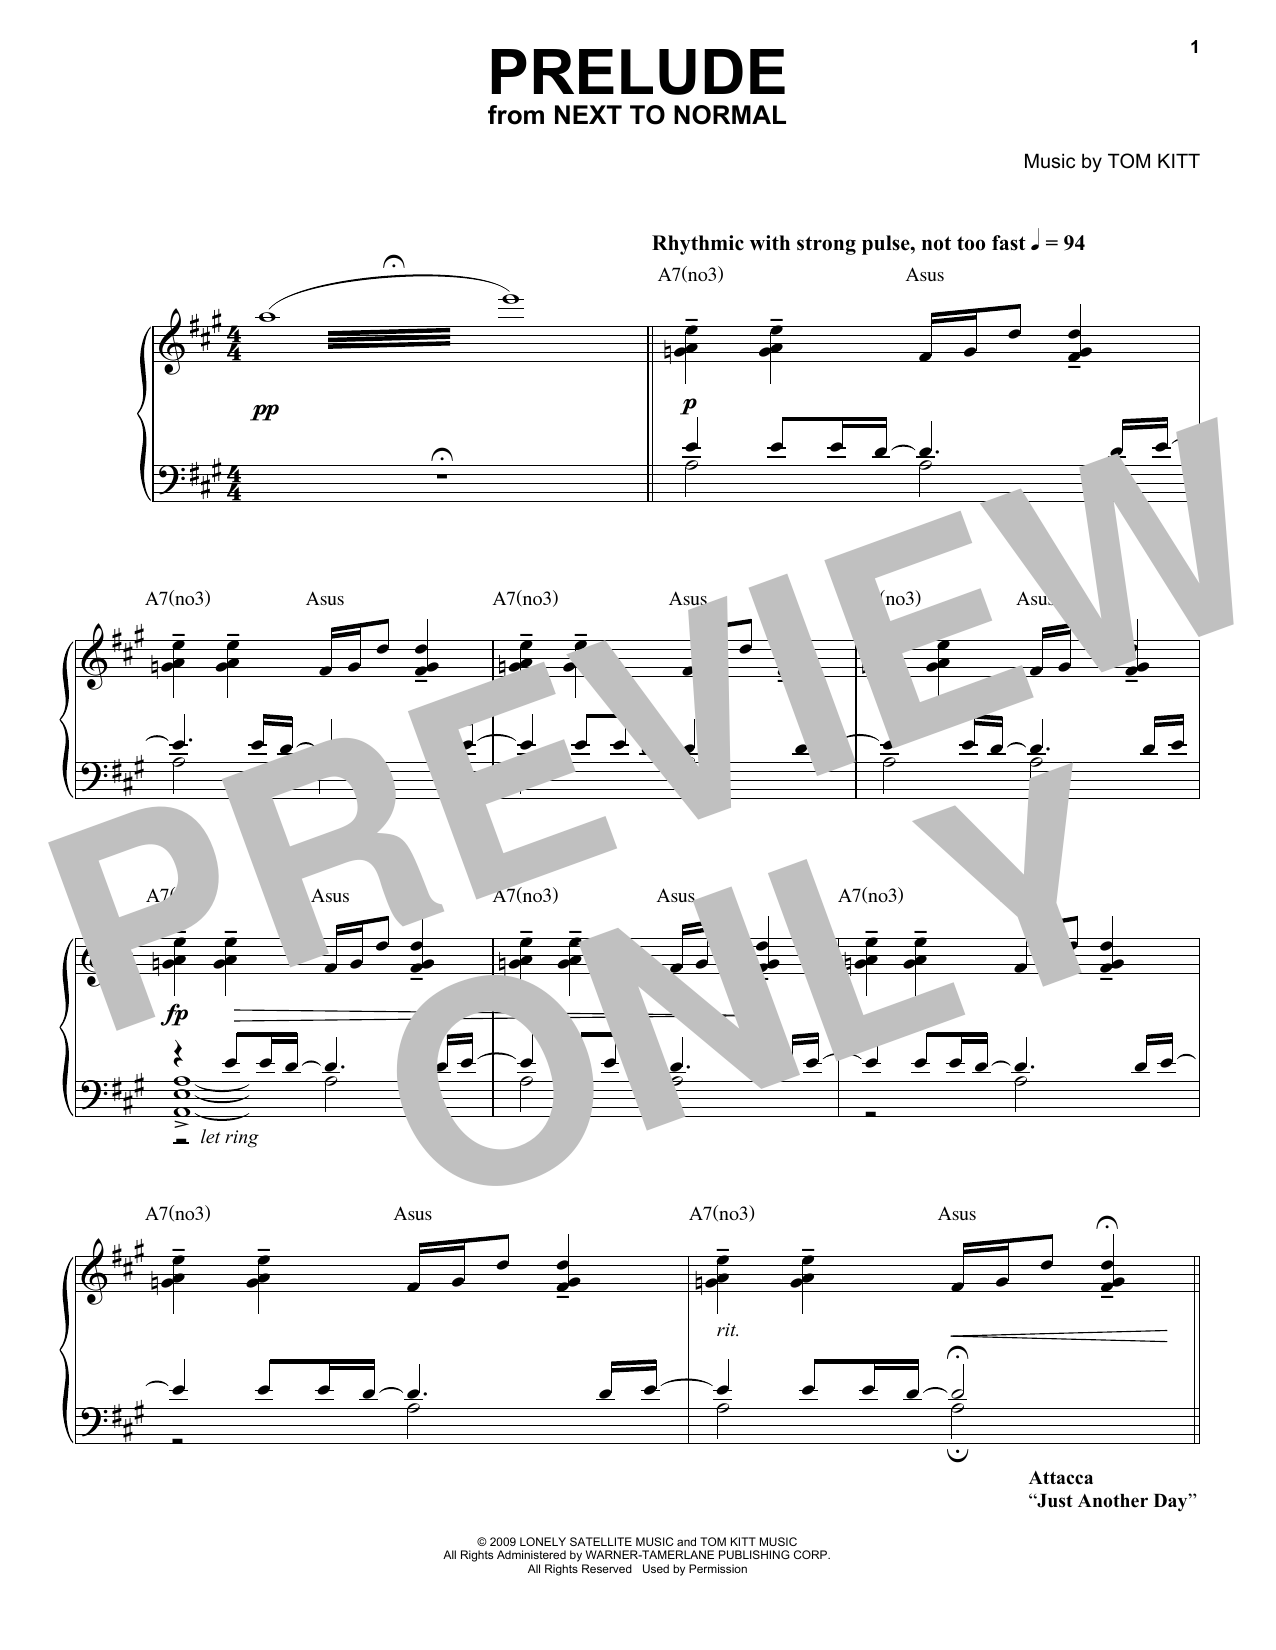 Download Next to Normal Band Prelude (from Next to Normal) Sheet Music